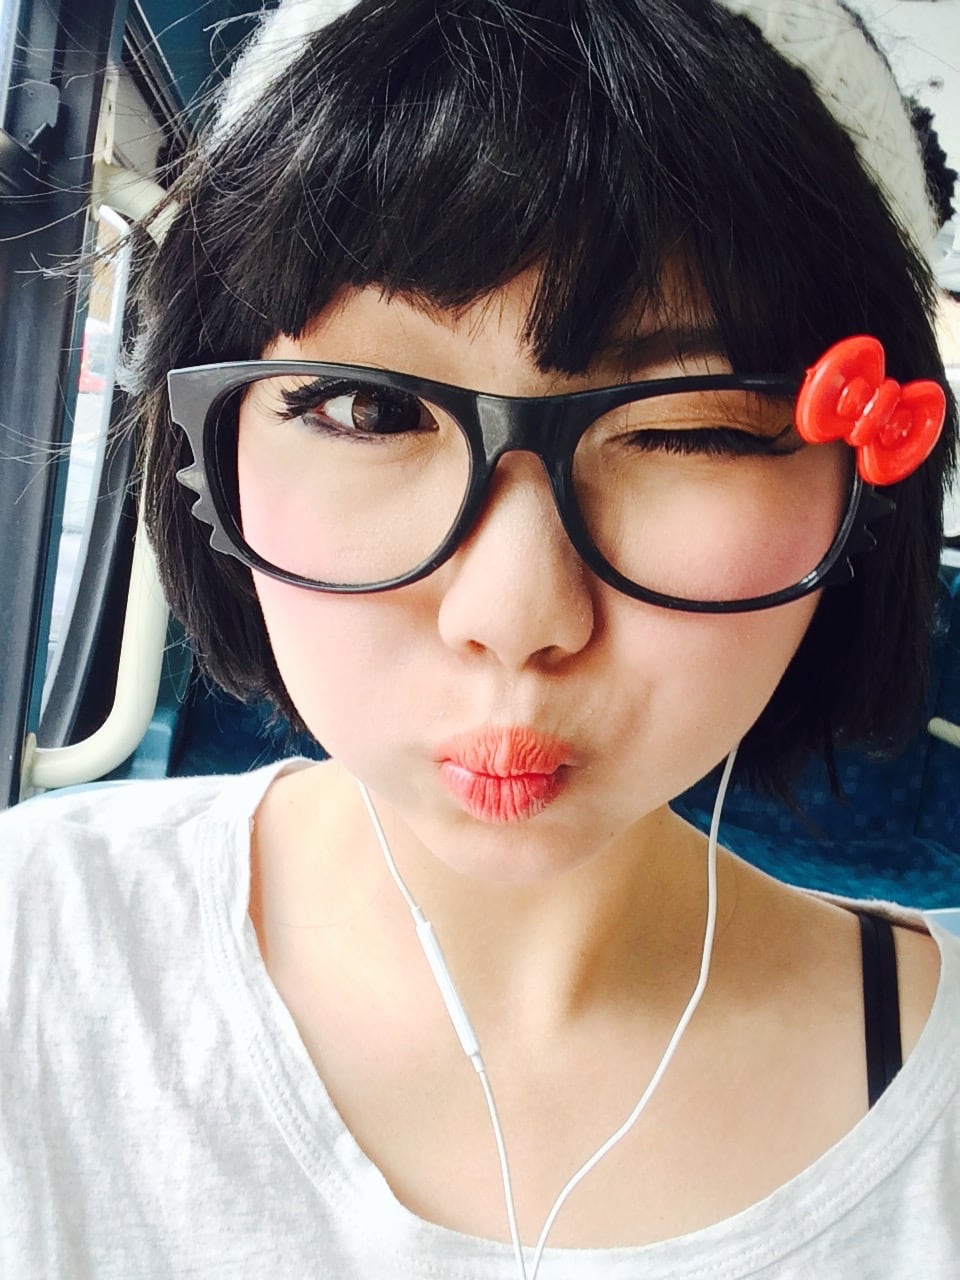 Cute short hair and glasses on the bus